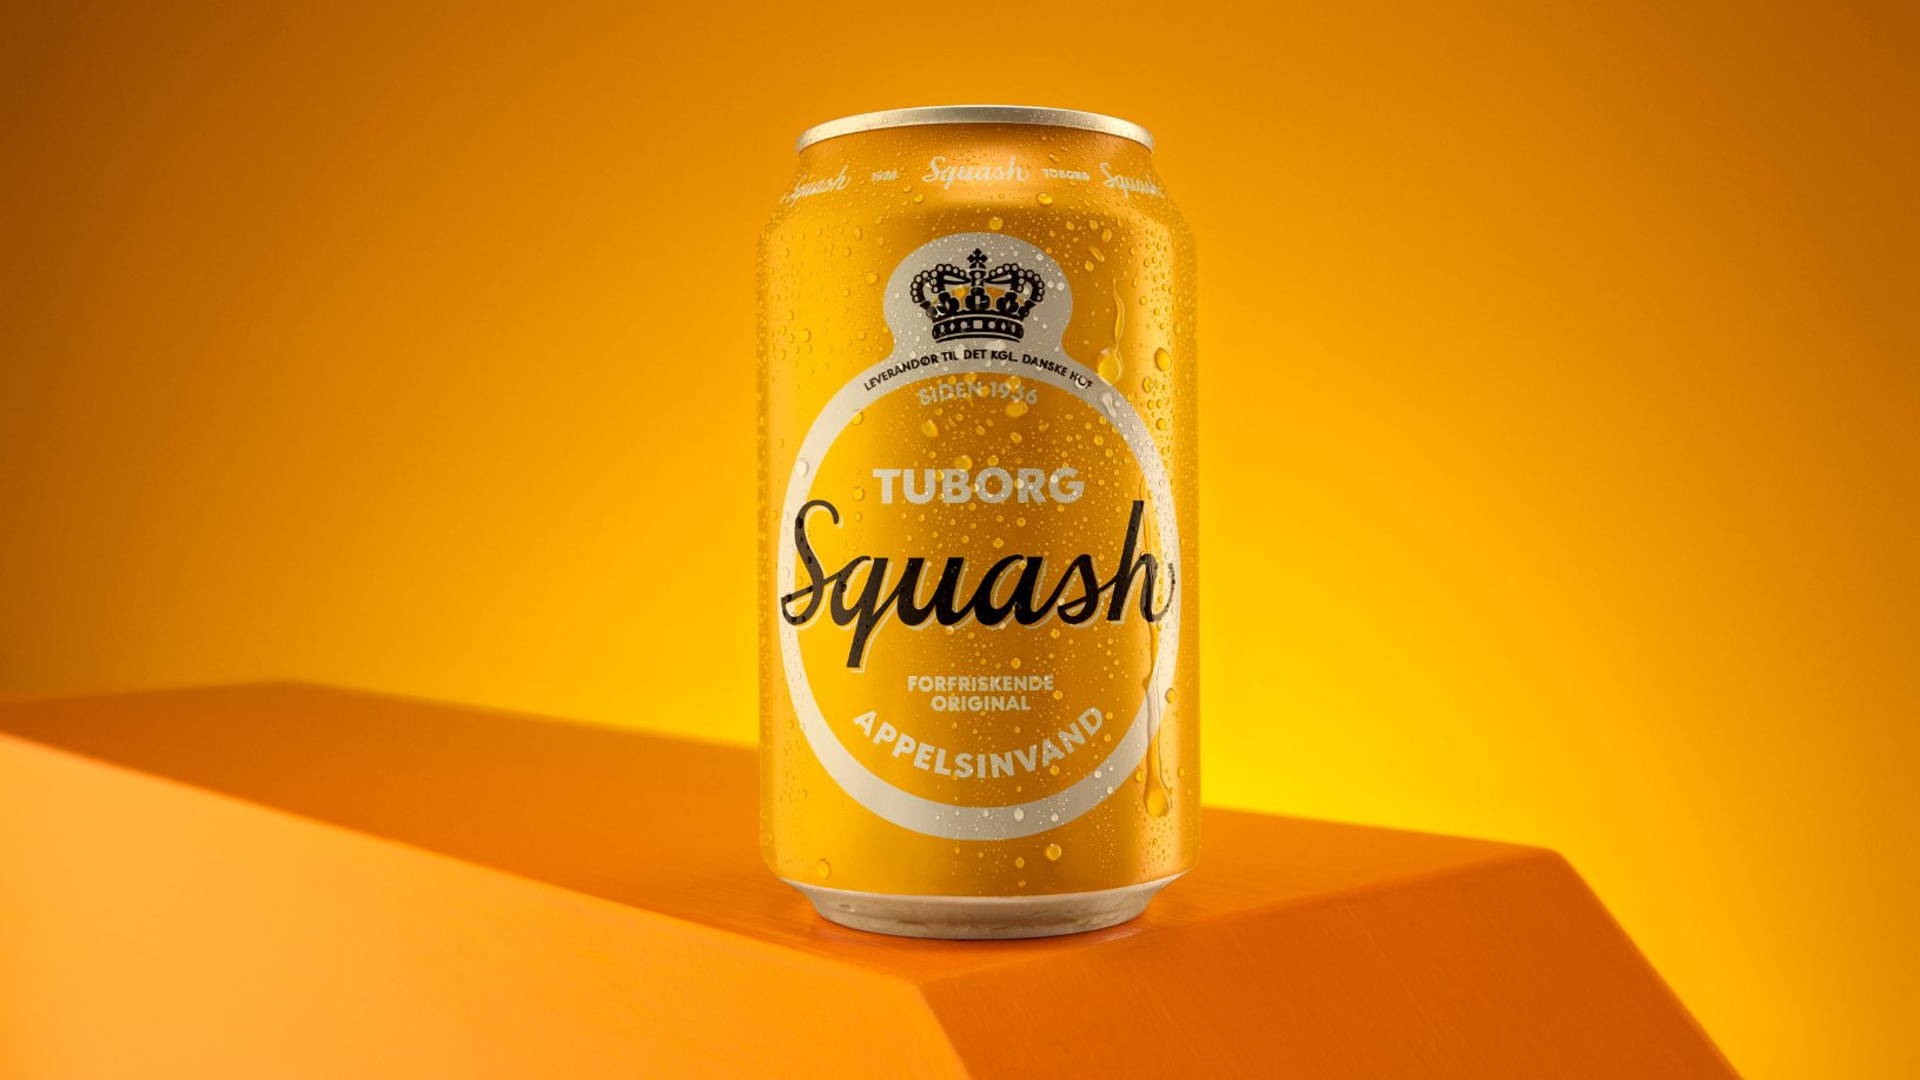 Featured image for Everland and Creative Studio Another Refresh Classic Denmark Soda Tuborg Squash